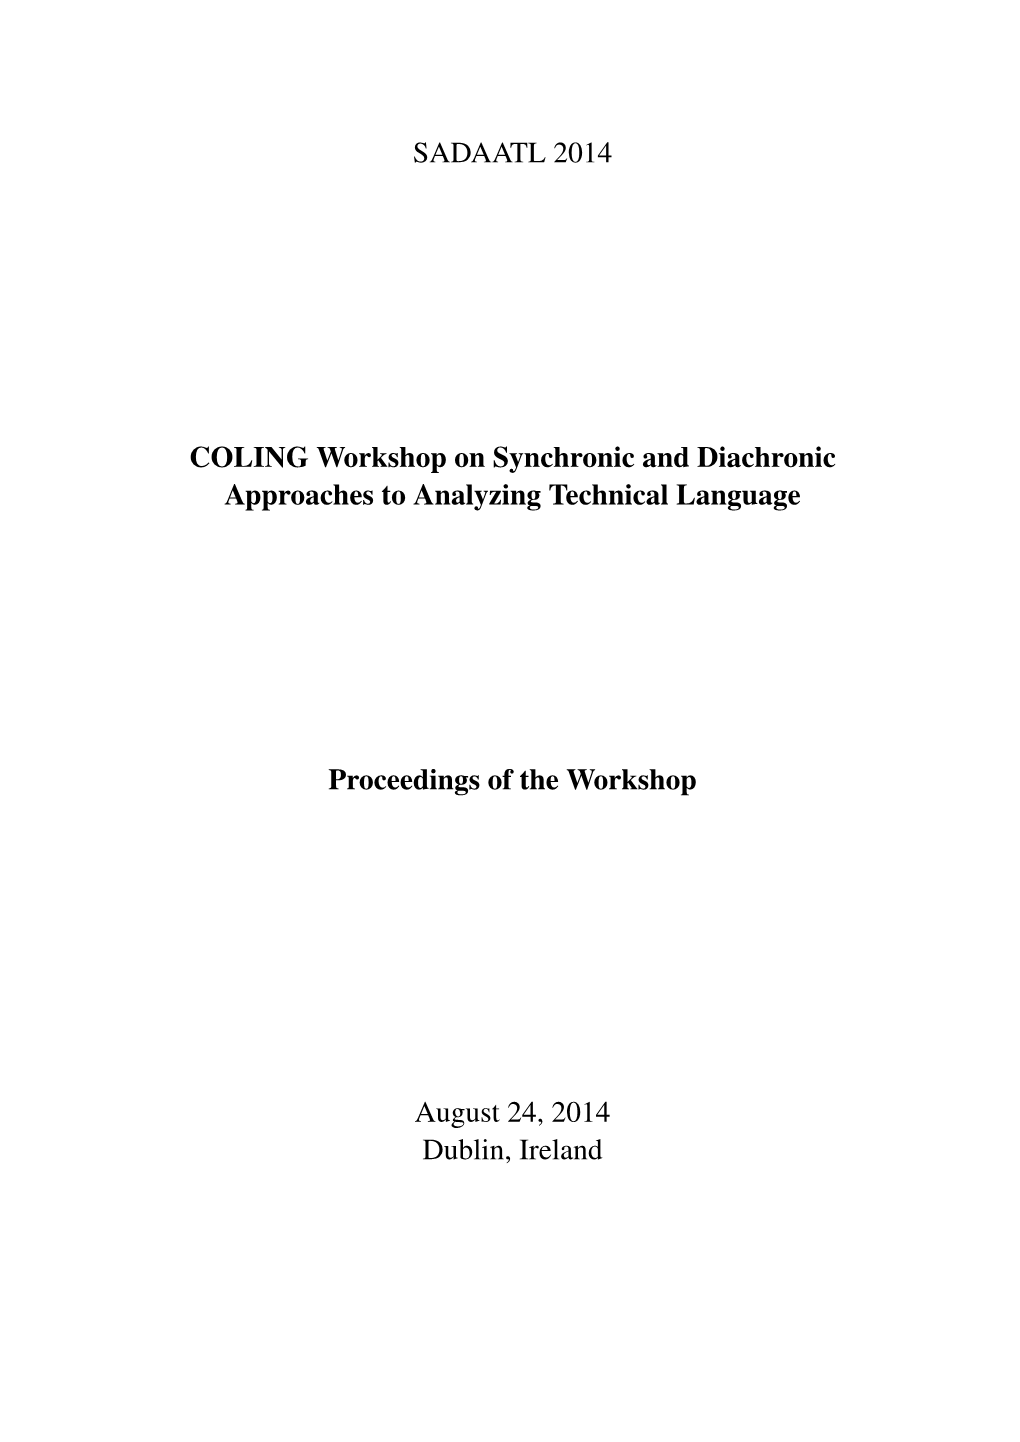 Proceedings of the COLING Workshop On